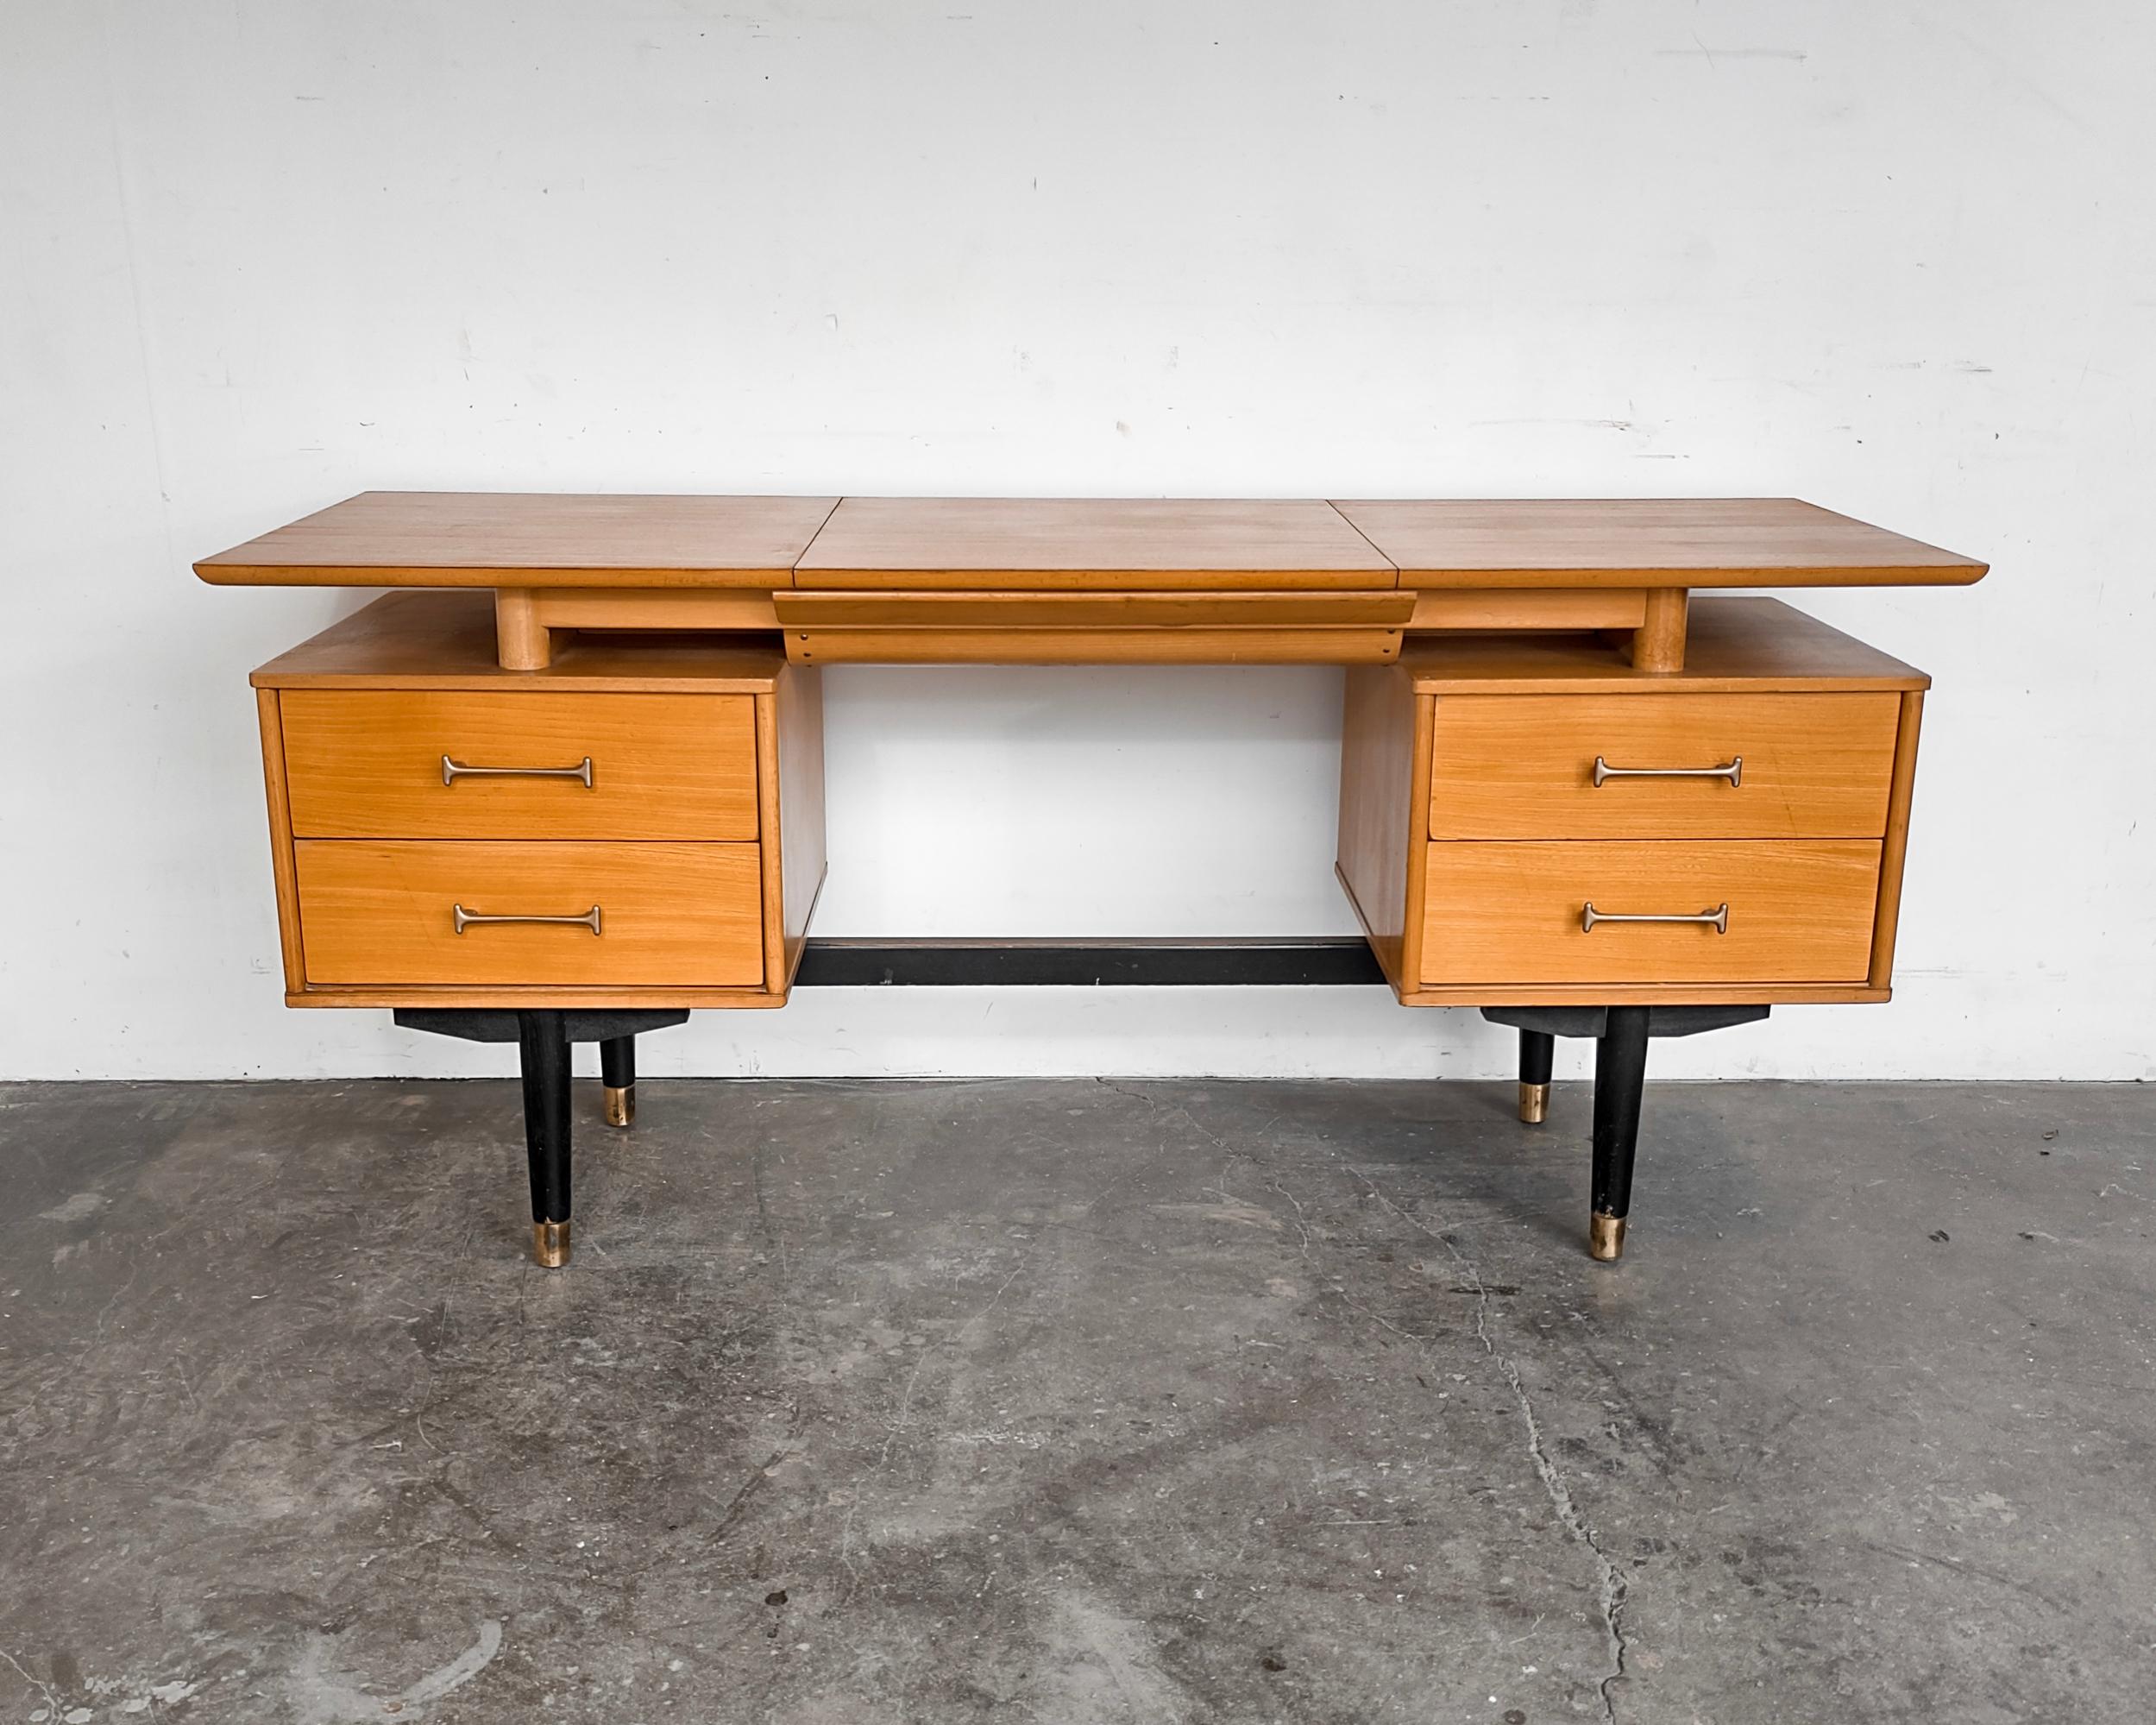 Flip-top elm wood vanity desk by Milo Baughman for Drexel. Painted black base with brassy hardware and four drawers. No chips to mirror and all drawers slide well. Finished on back.

Measures: 60” L
20.5” D
27